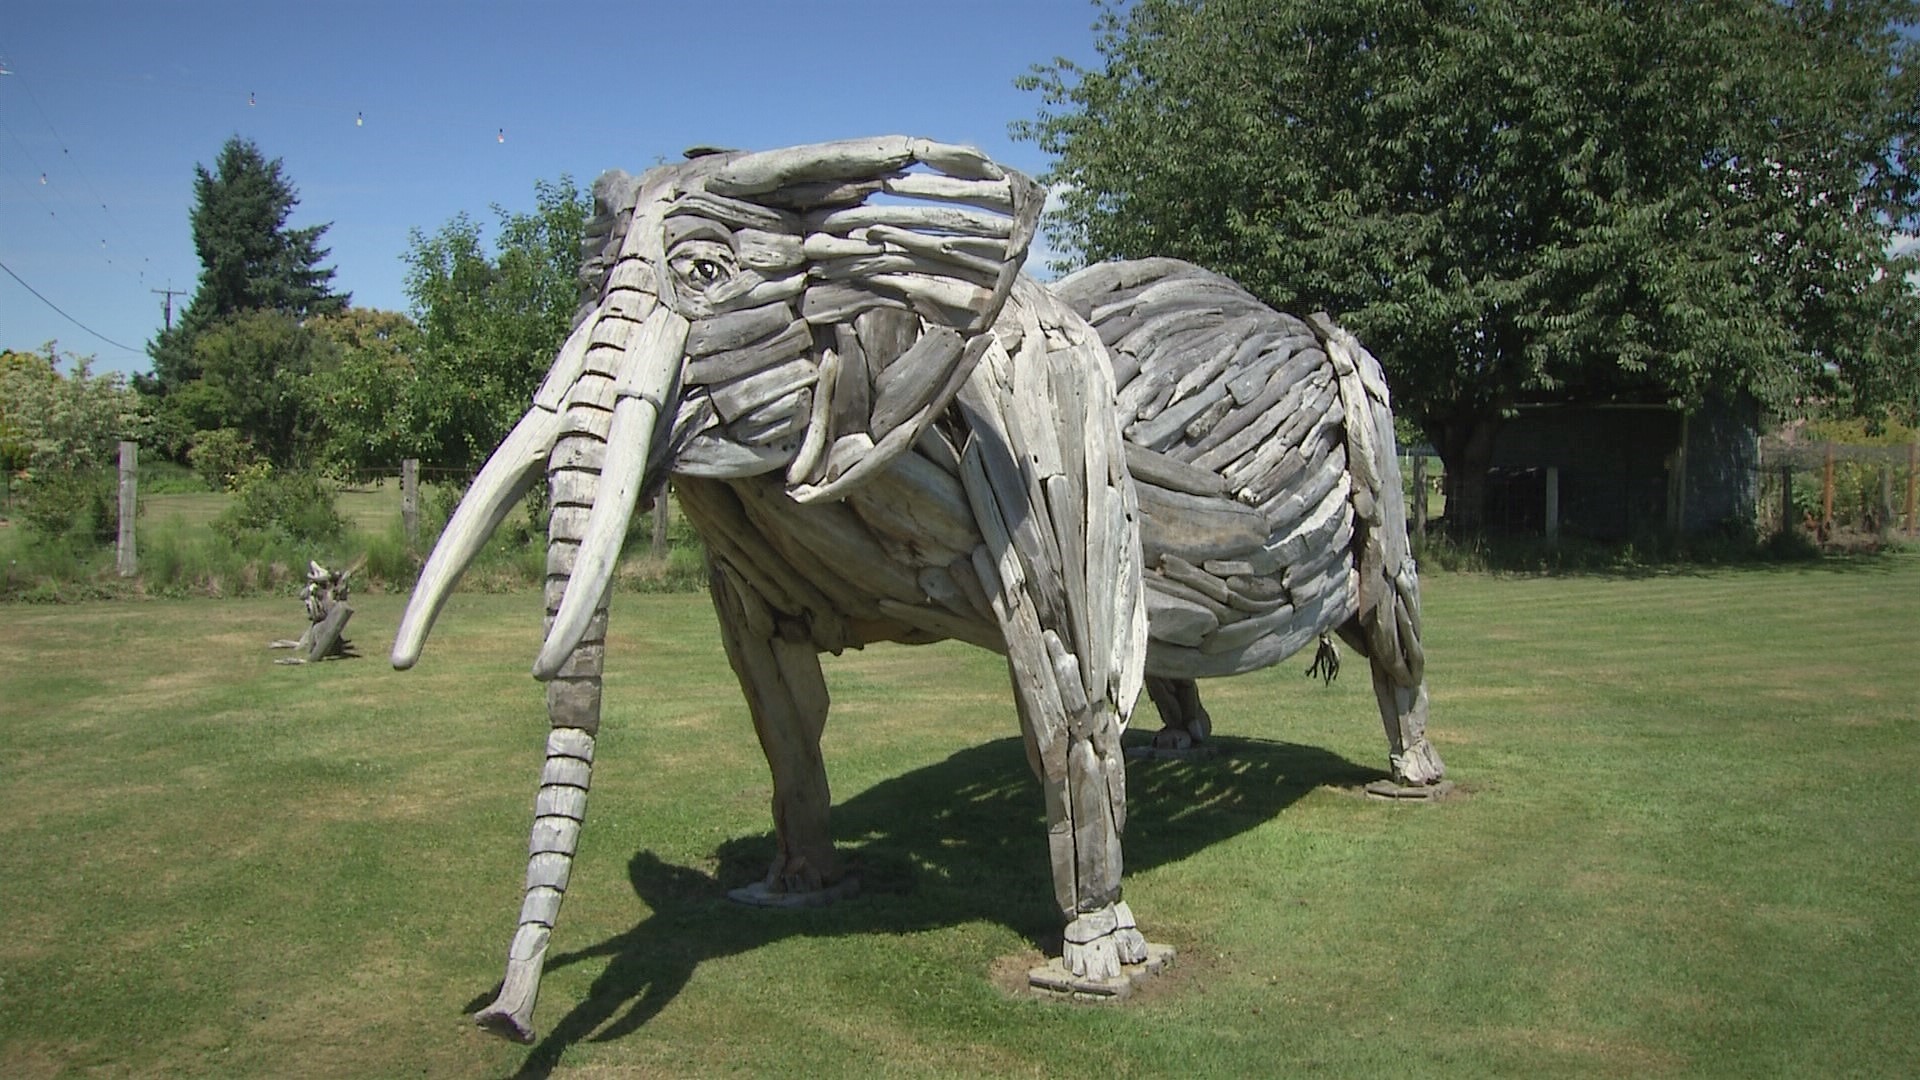 Joe Treat's creatures are on display in his front yard and at various Skagit, Snohomish and Island county locations